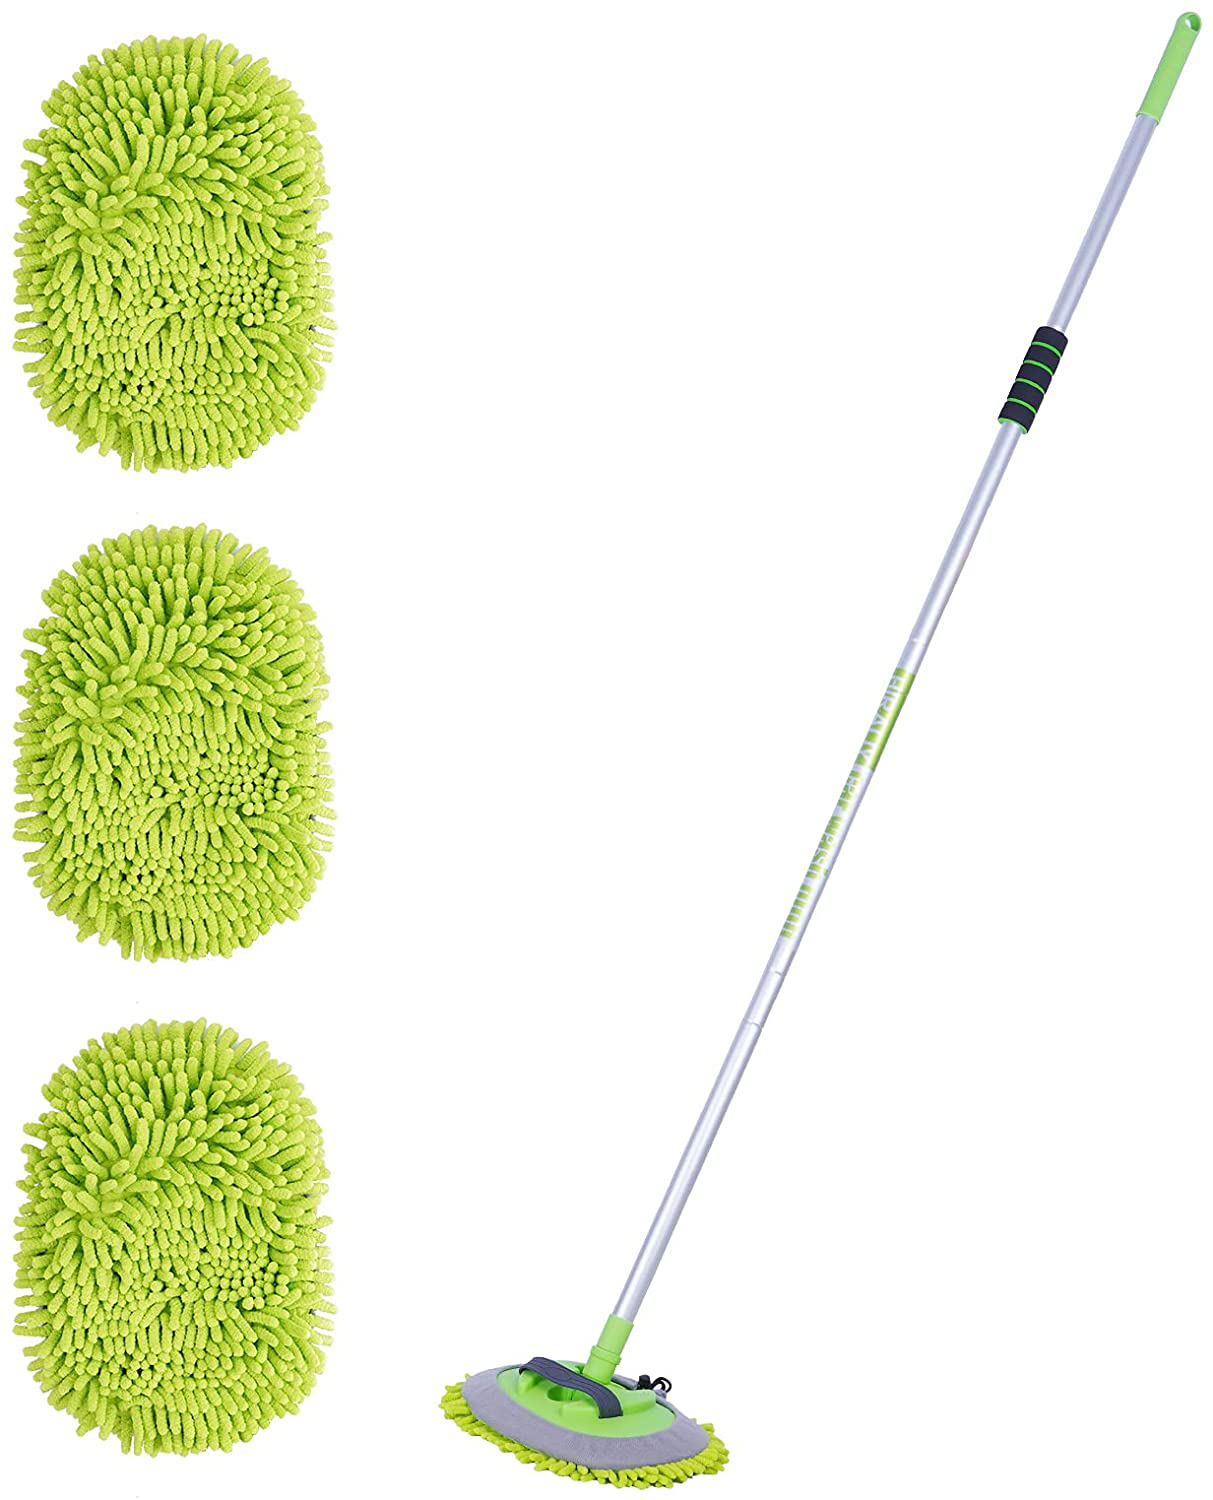 HIRALIY 2 in 1 Car Wash Brush, 62" Car Wash Mop with Long Handle, Chenille Microfiber Car Washing Mitt, Extension Pole Flexible Rotation Scratch Free, Used to Clean Trucks, RVs, Pickups, and Buses